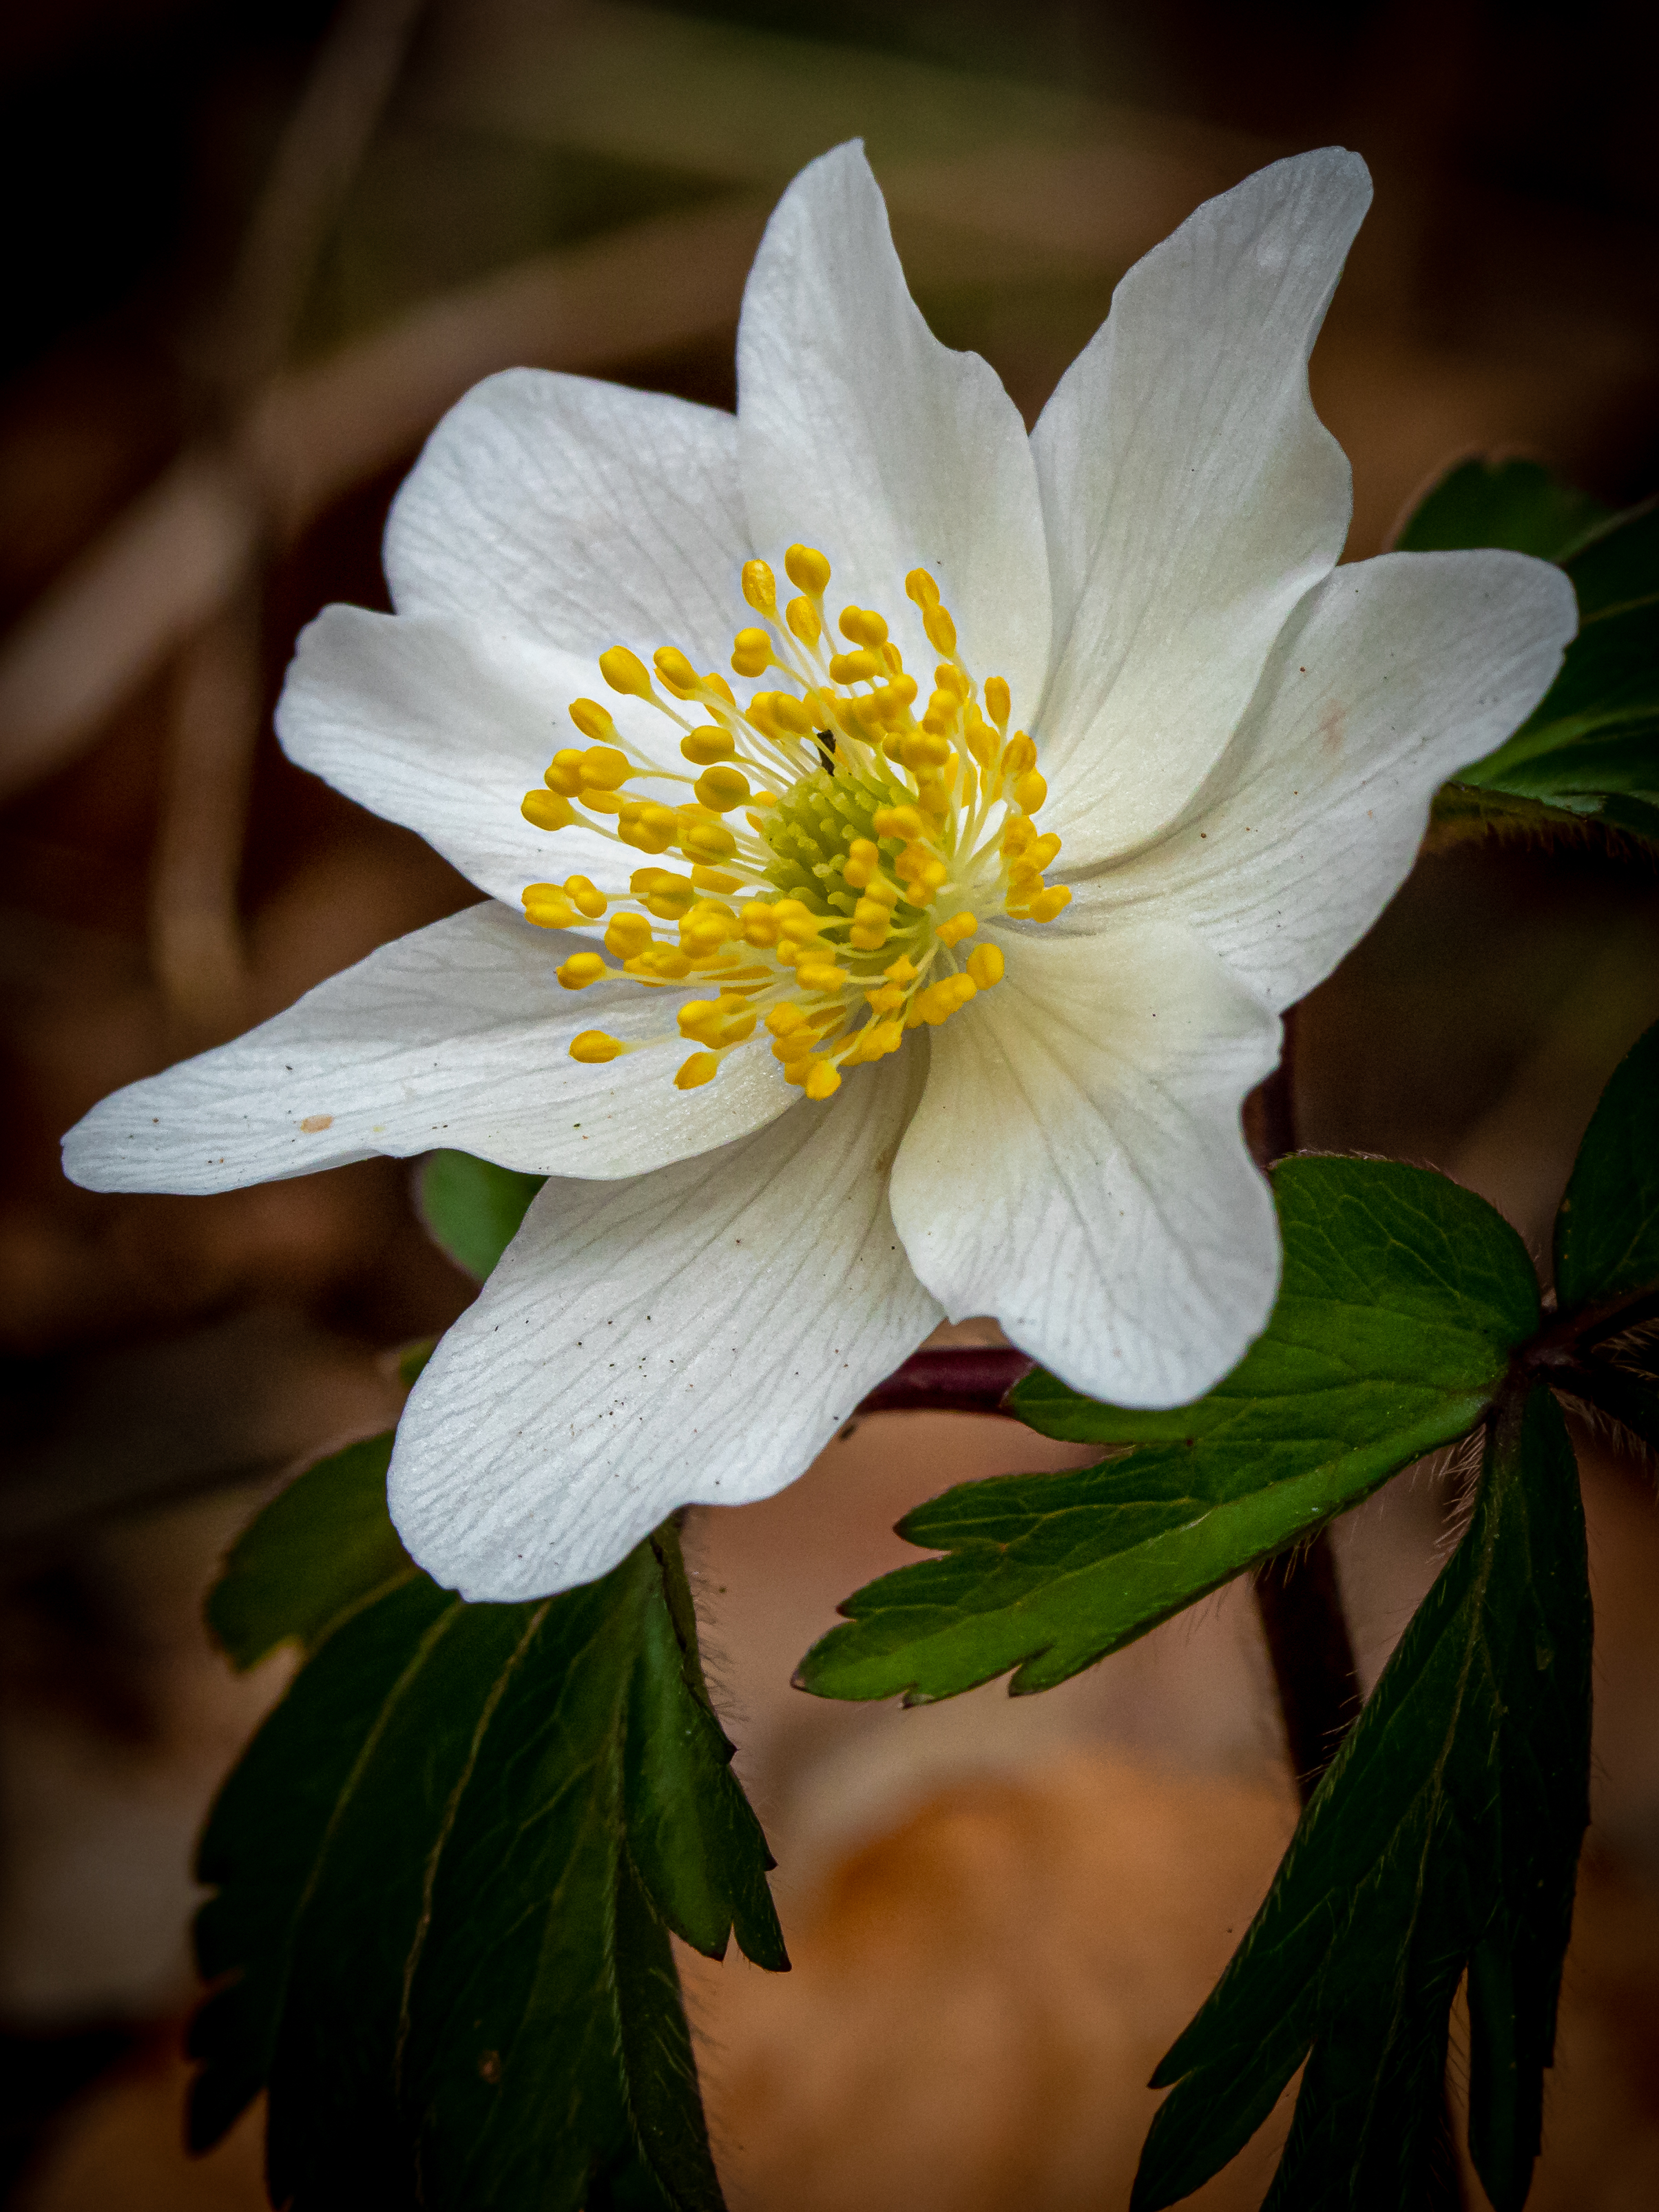 Wood Anemone Trembles in the Wind